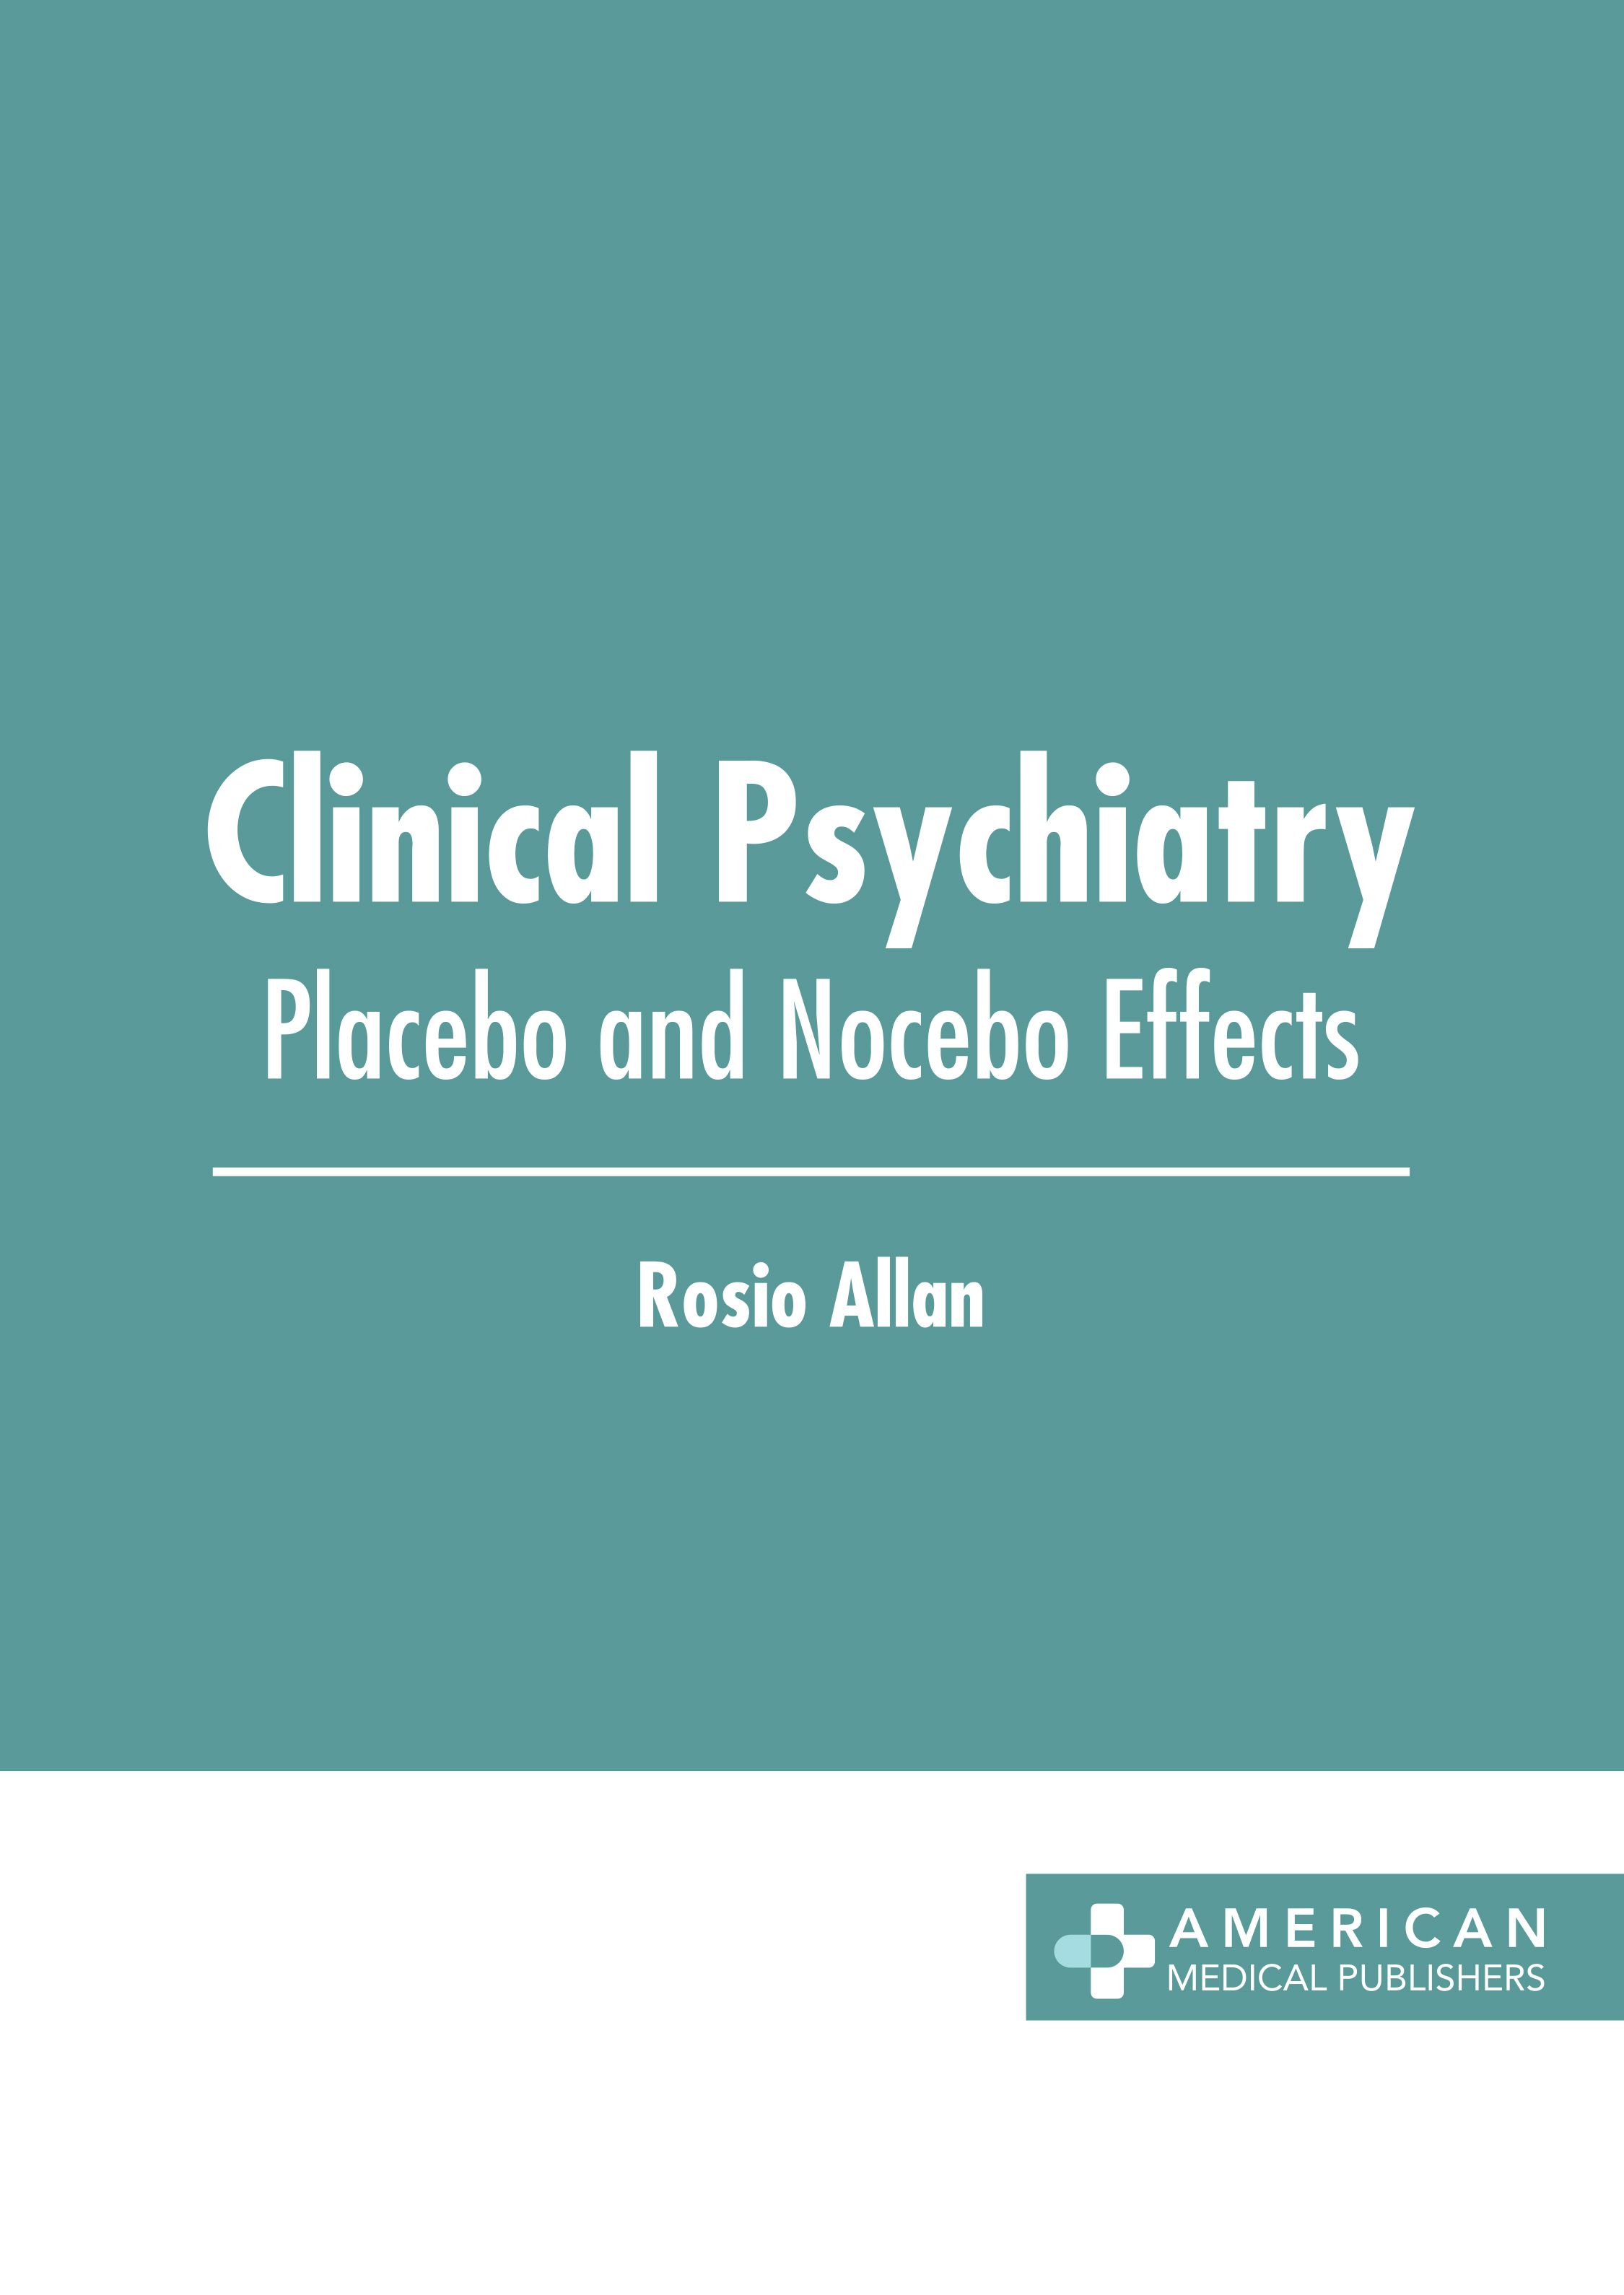 

exclusive-publishers/american-medical-publishers/clinical-psychiatry-placebo-and-nocebo-effects-9798887400075